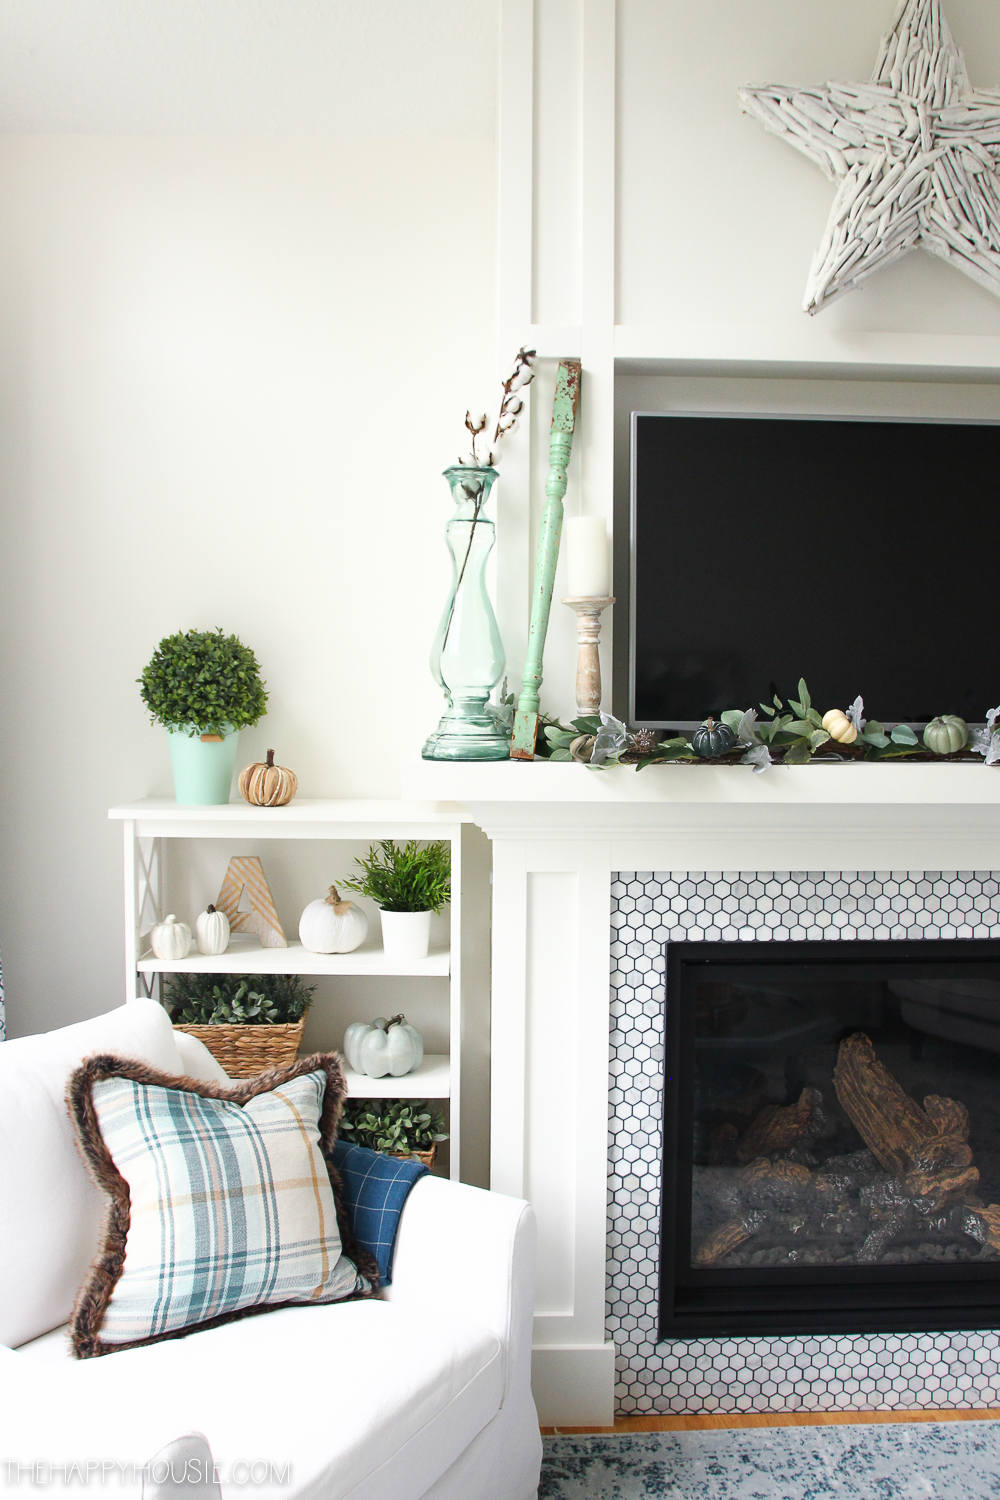 A small shelf beside the fireplace is beside the armchair.